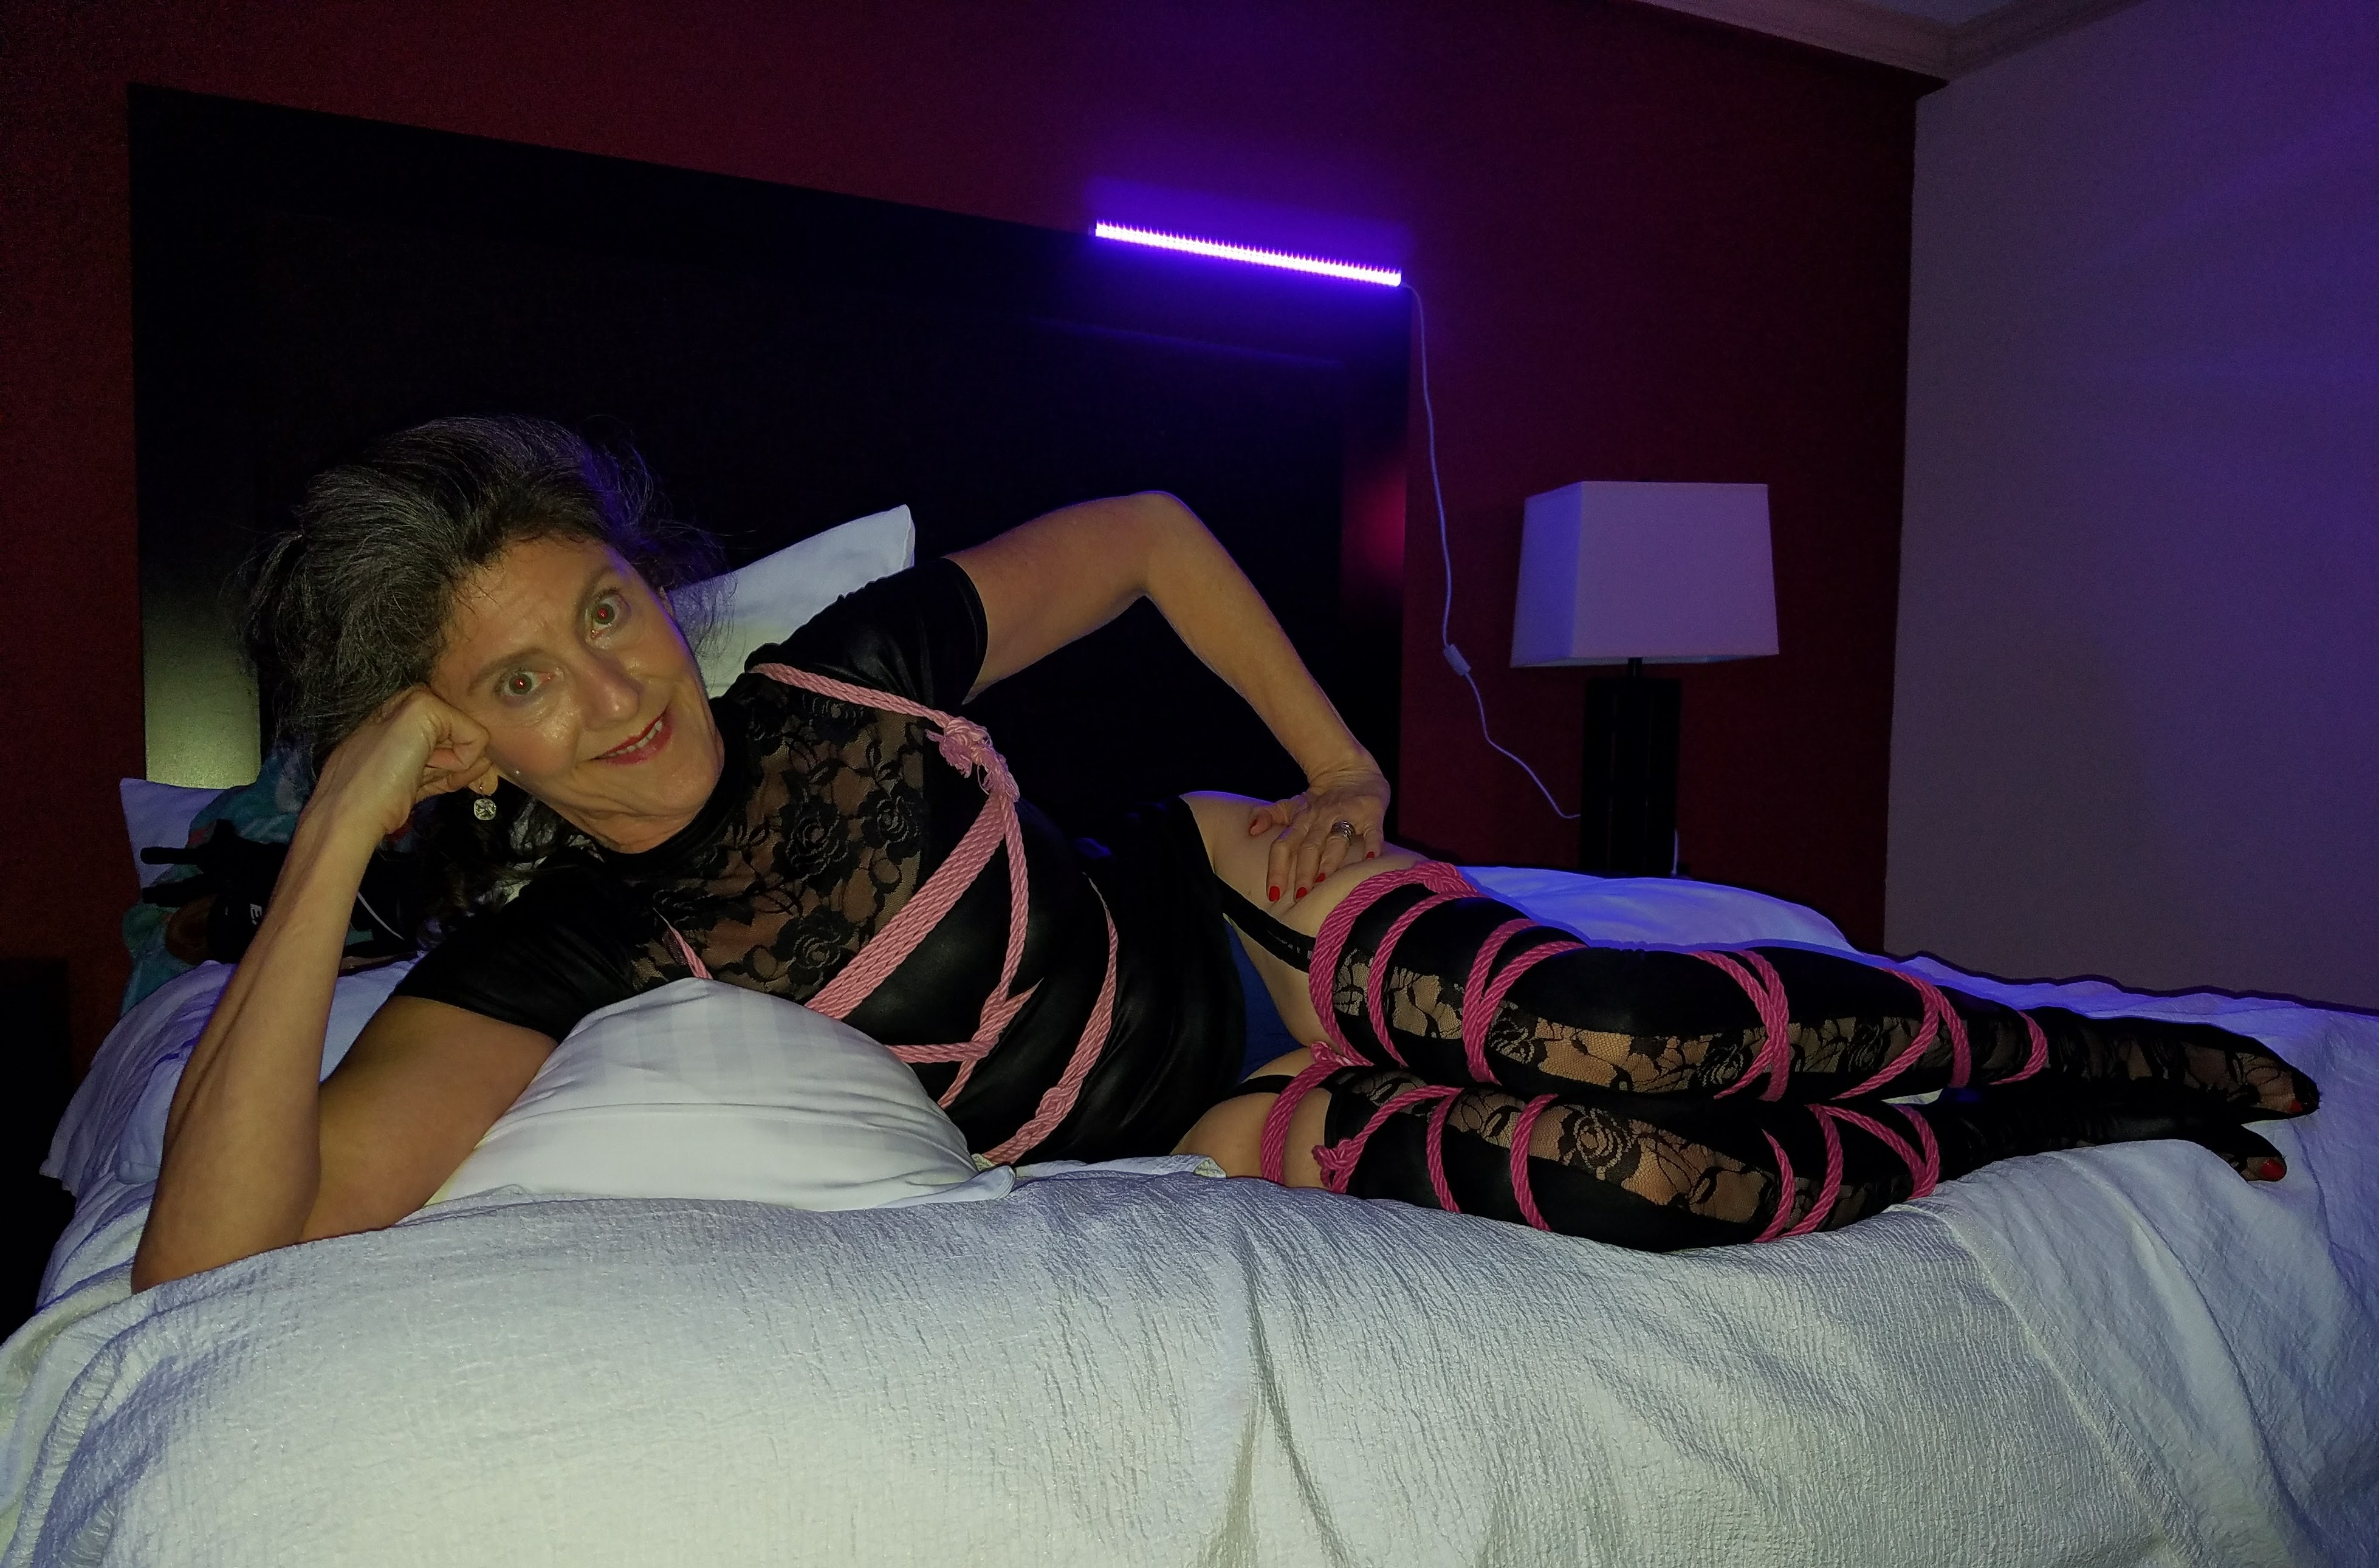 MadameSamanthaB, Lady Alice, Crimson Moon, Bound at a kinky party, Bound in pink rope, Bound in rope,